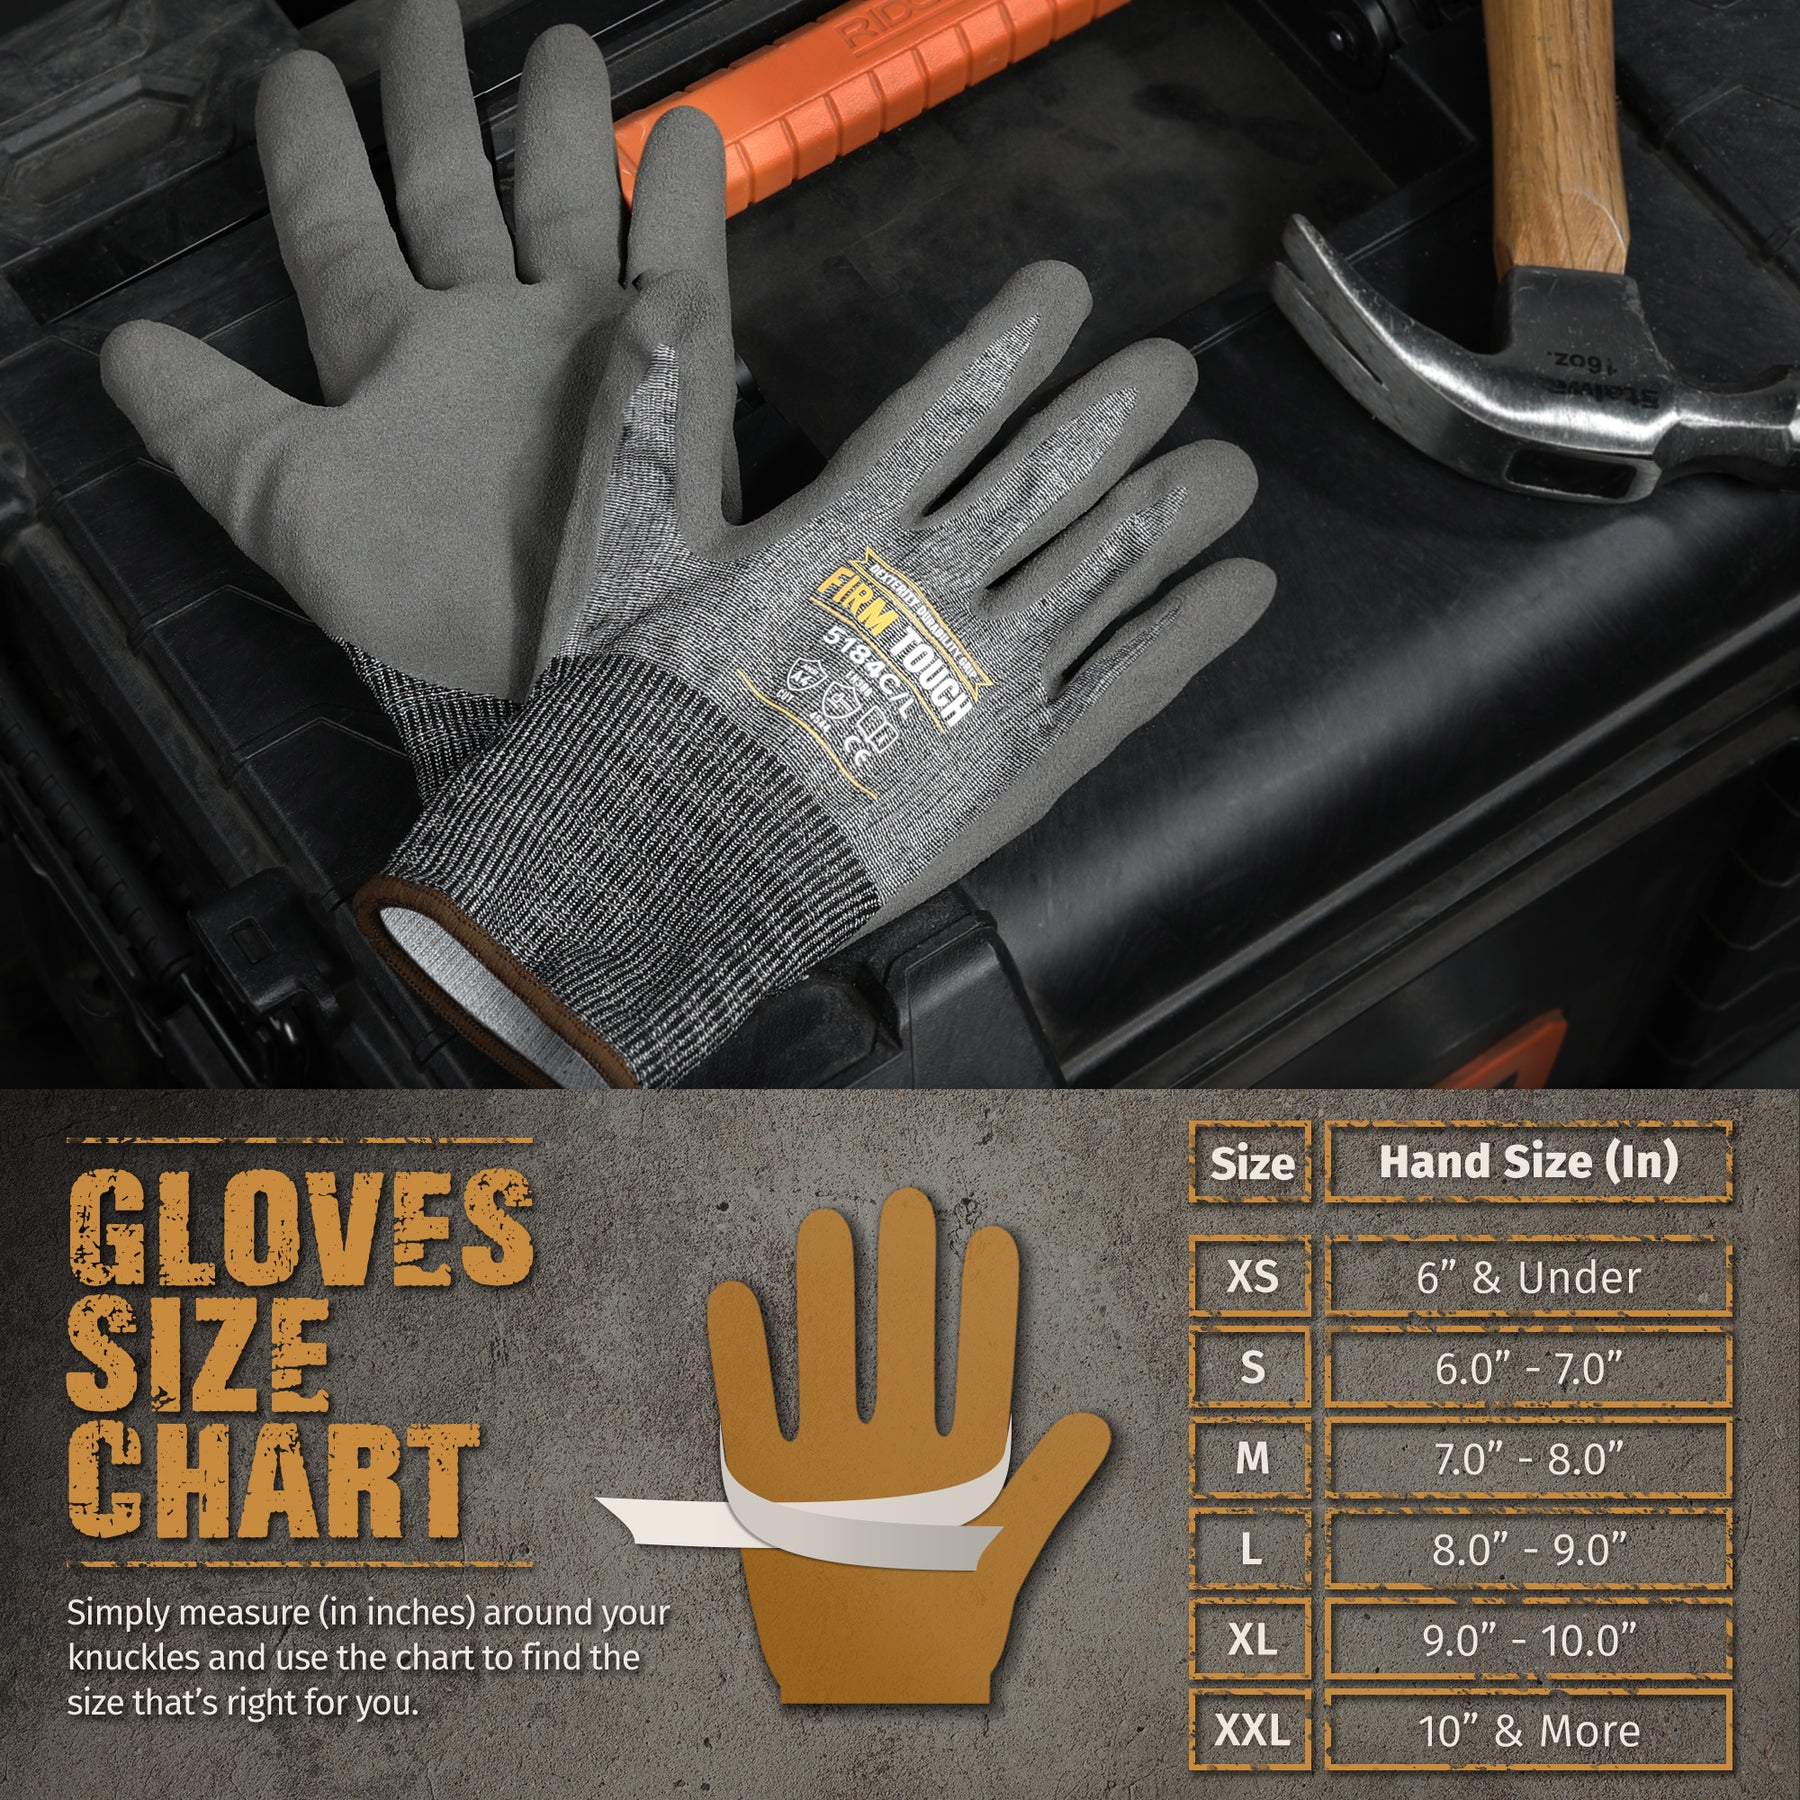 Nitrile Dipped Safety Work Gloves, Cut Resistant, Grey, Size: S/M/L/XL/2XL